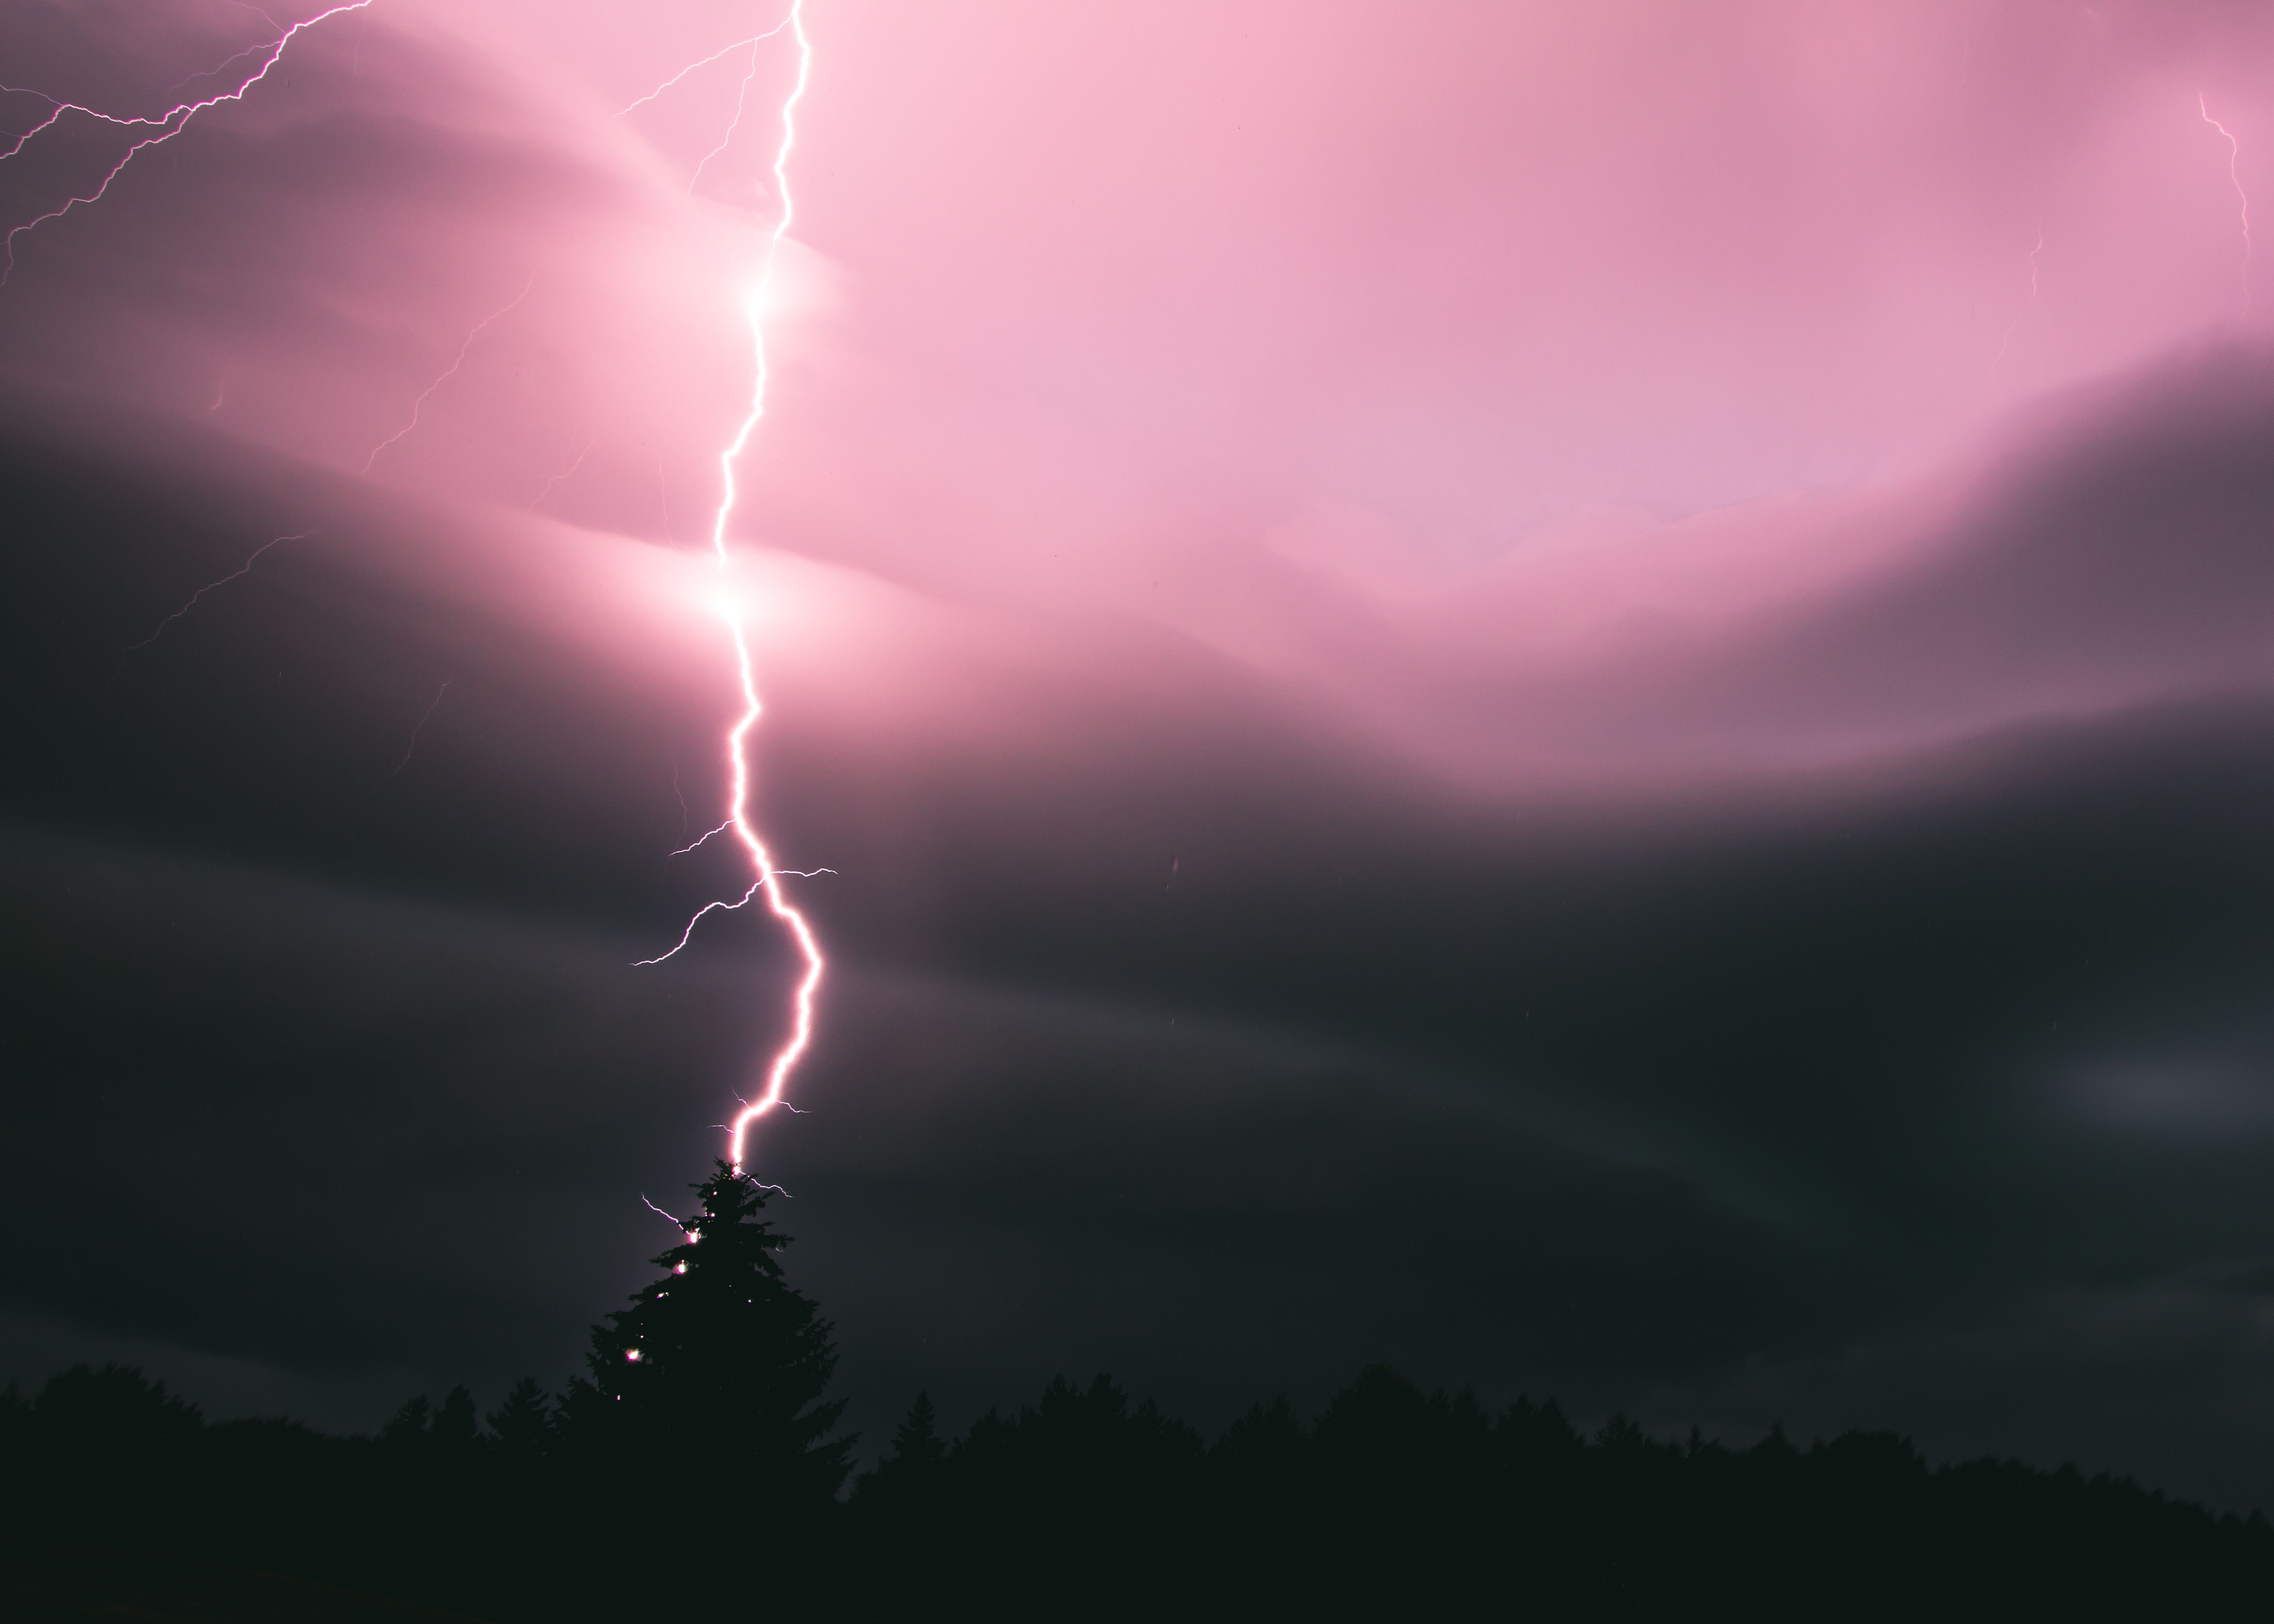 Wallpaper, night, sky, outdoors, clouds, lightning, storm, evening, Canon, atmosphere, Canada, pink, thunder, light, cloud, thunderstorm, skyscape, outside, darkness, computer wallpaper, meteorological phenomenon, cumulus 4686x3347